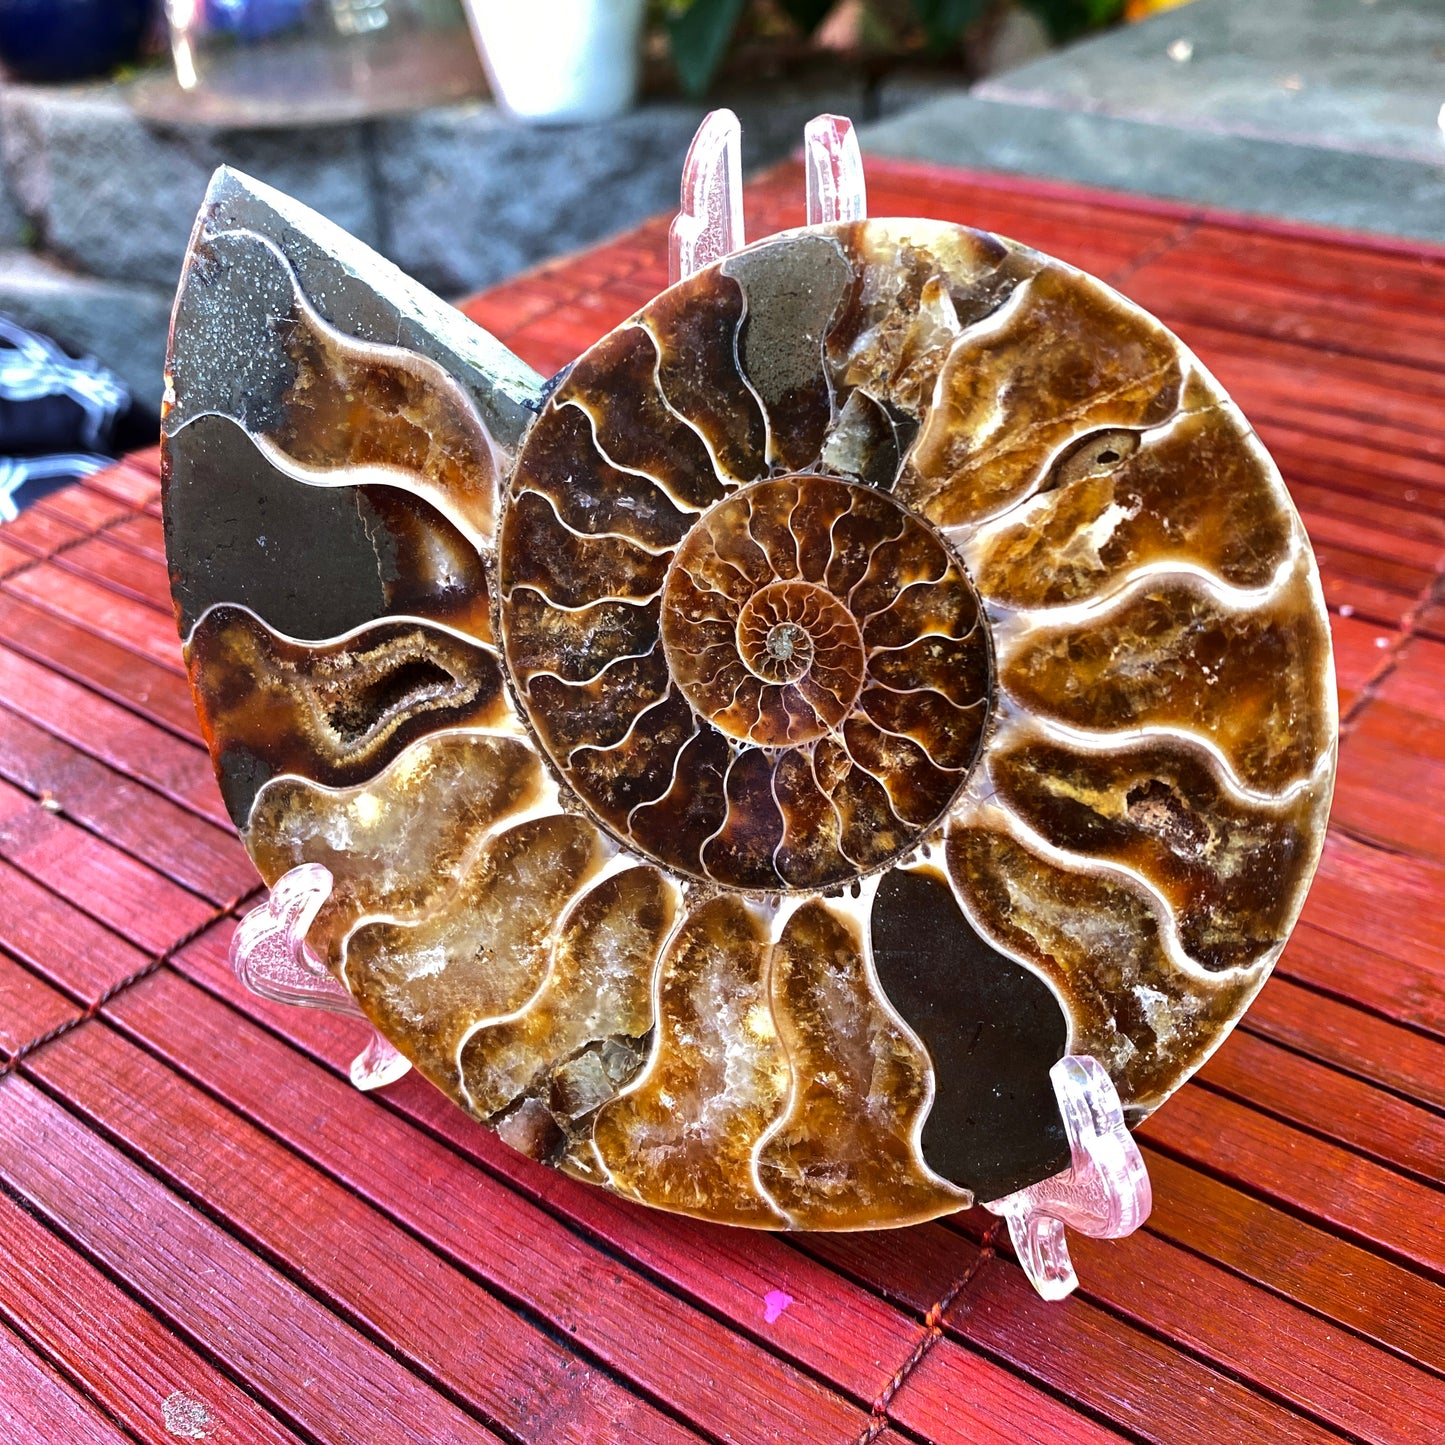 Natural Ammonite Fossil Shell